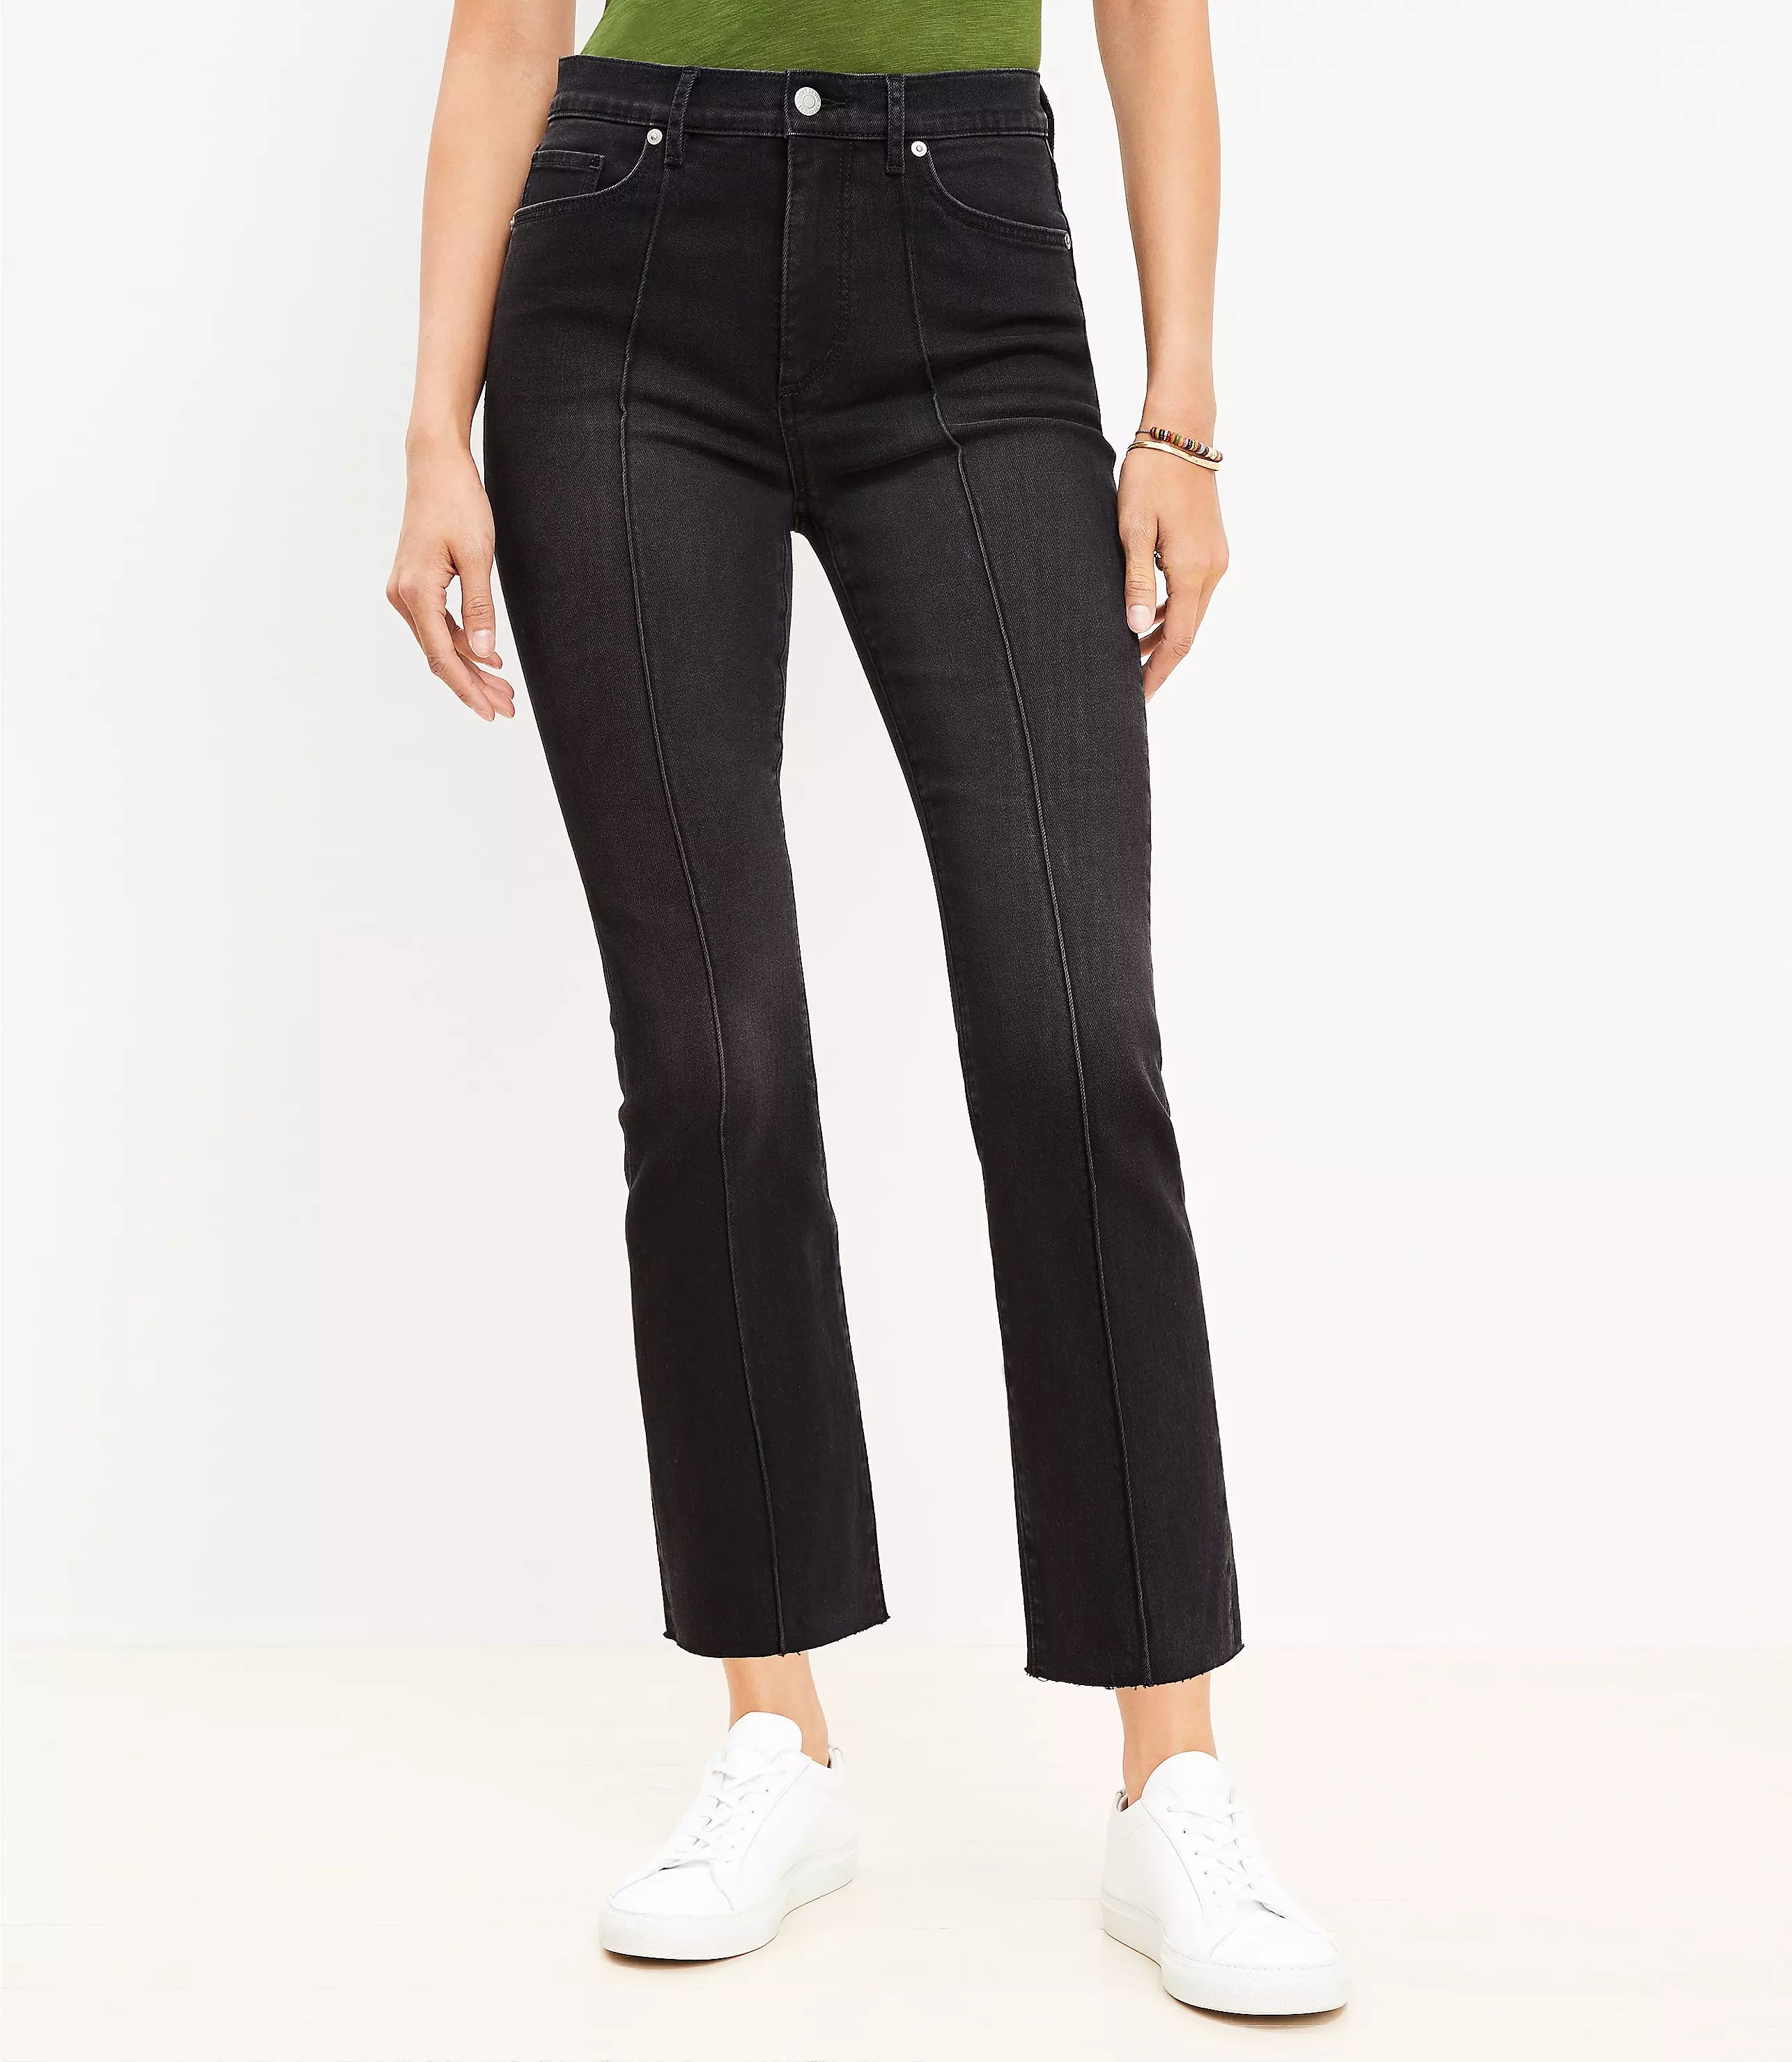 Pintucked Fresh Cut High Rise Kick Crop Jeans in Washed Black | LOFT